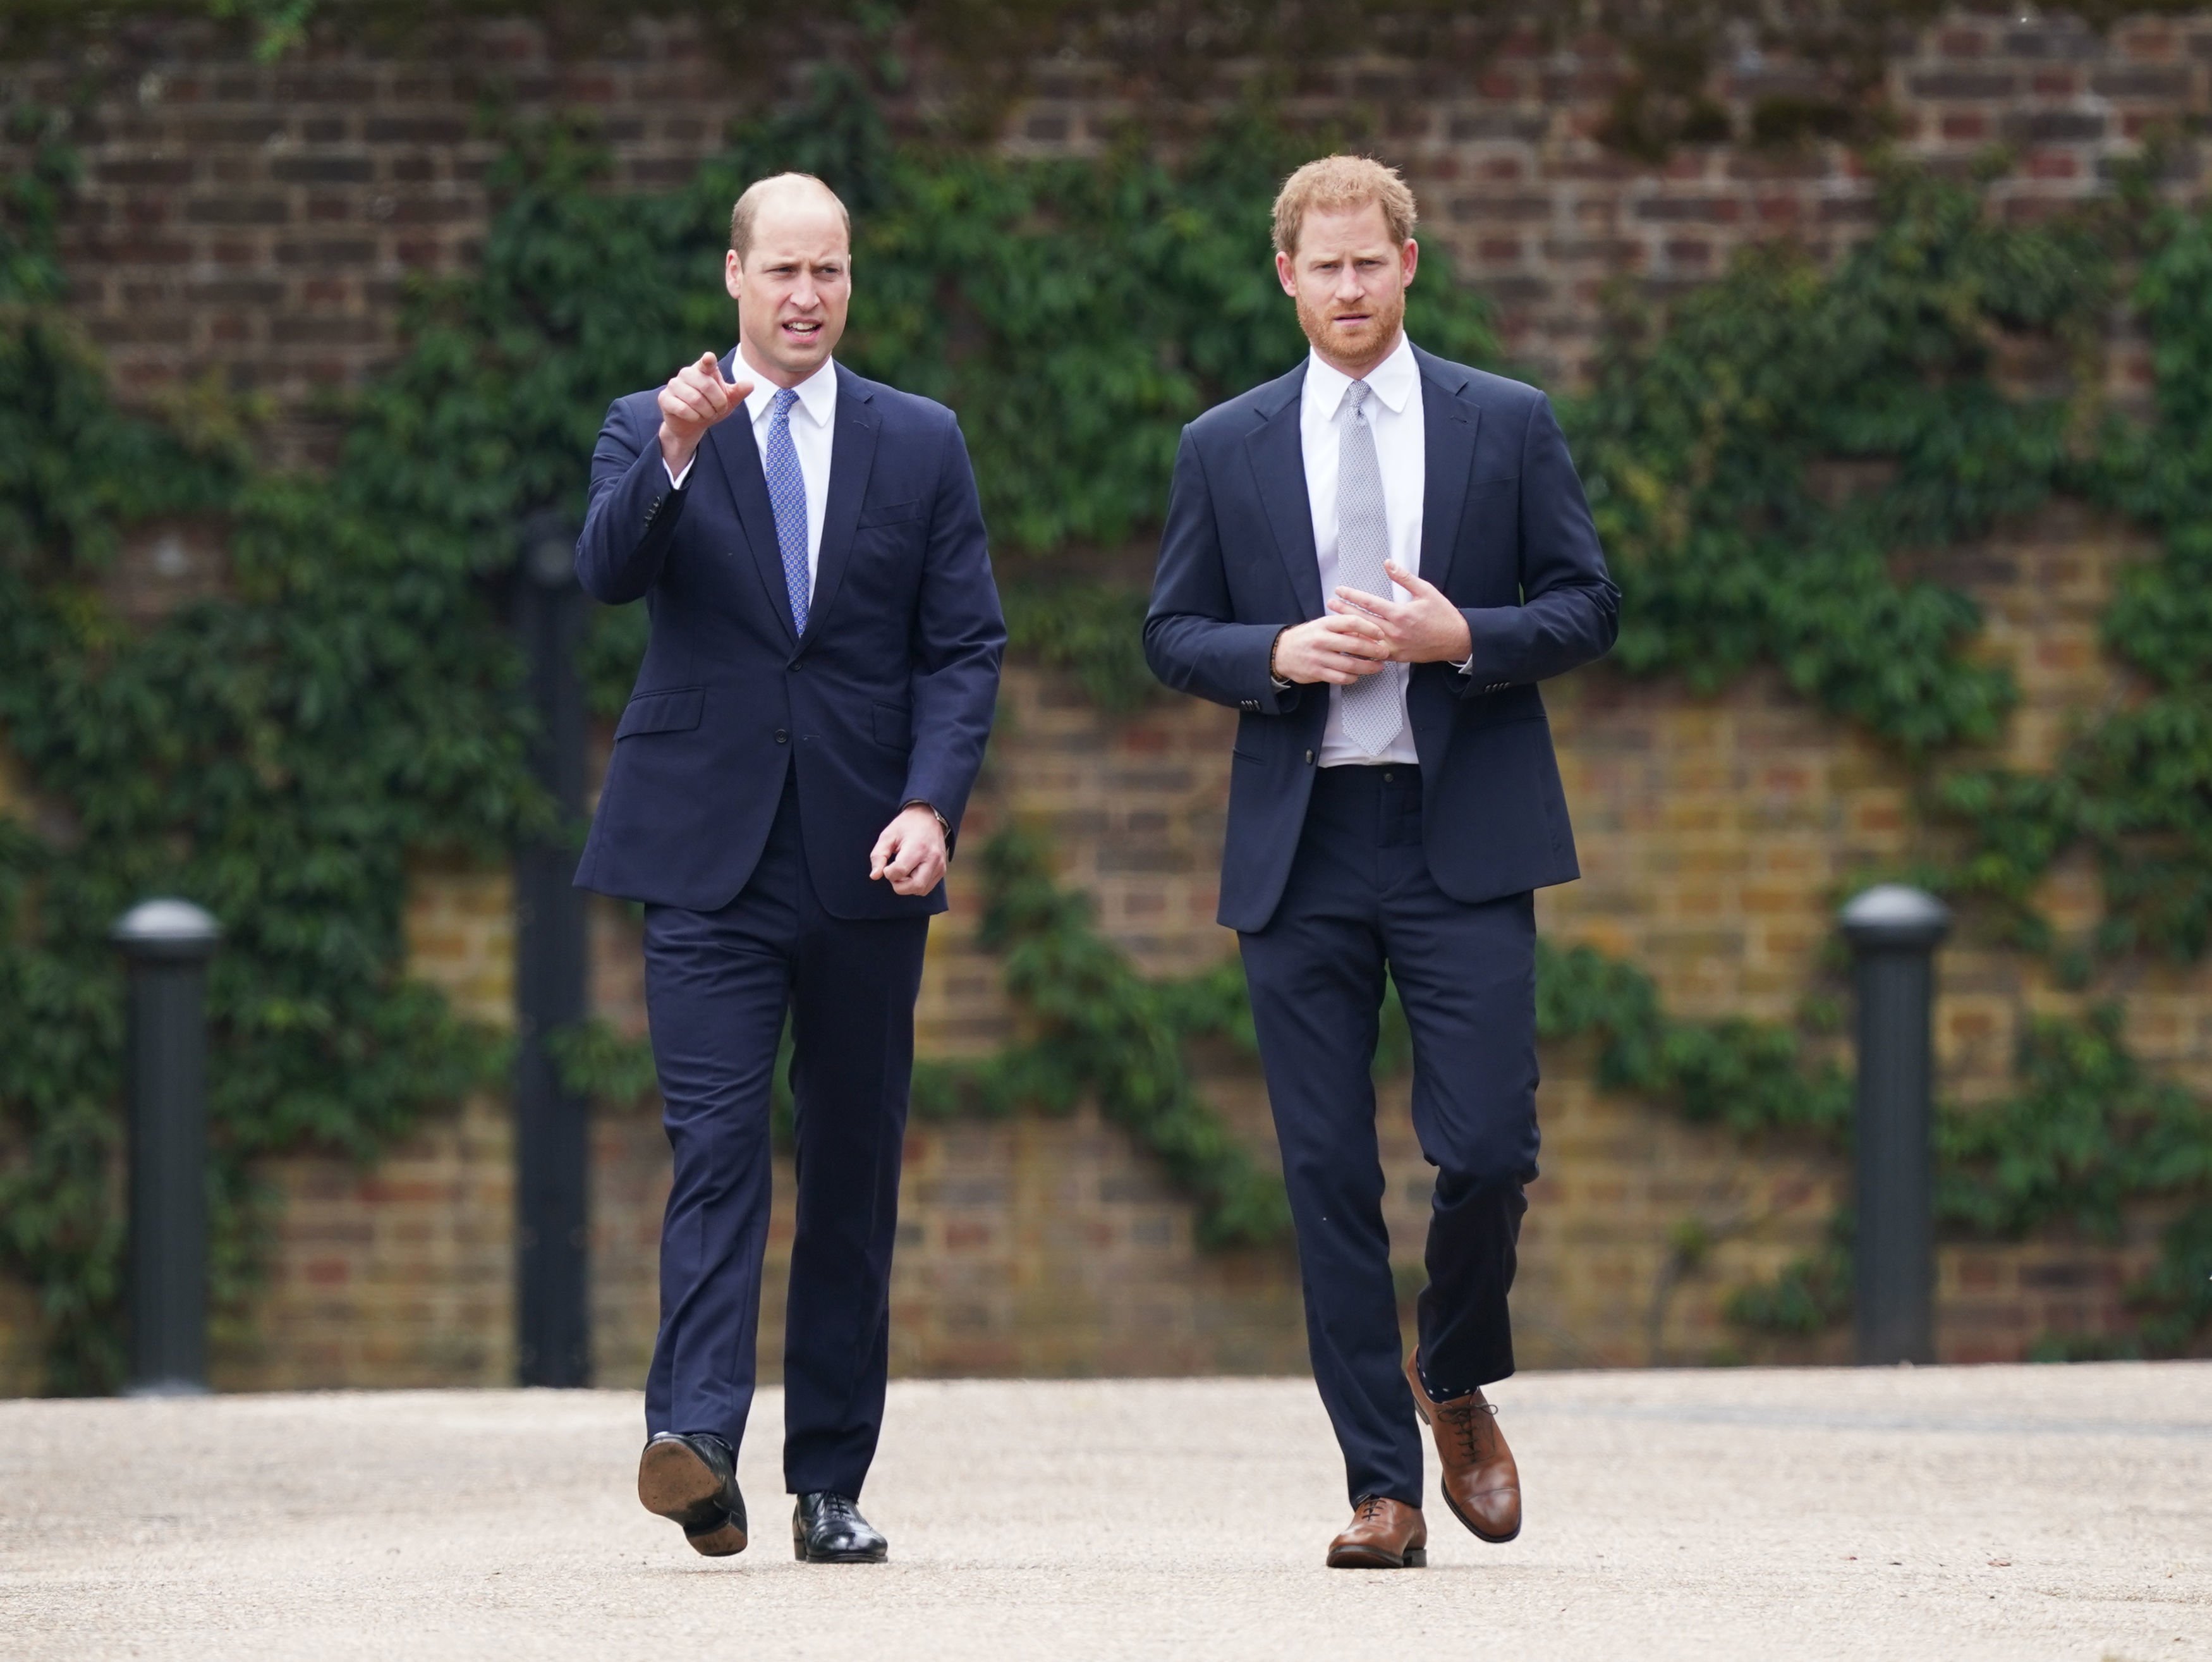 Prince William and Prince Harry at the unveiling of a statue of their mother Princess Diana in the Sunken Garden at Kensington Palace, on July 1, 2021, in London, England. | Source: Getty Images